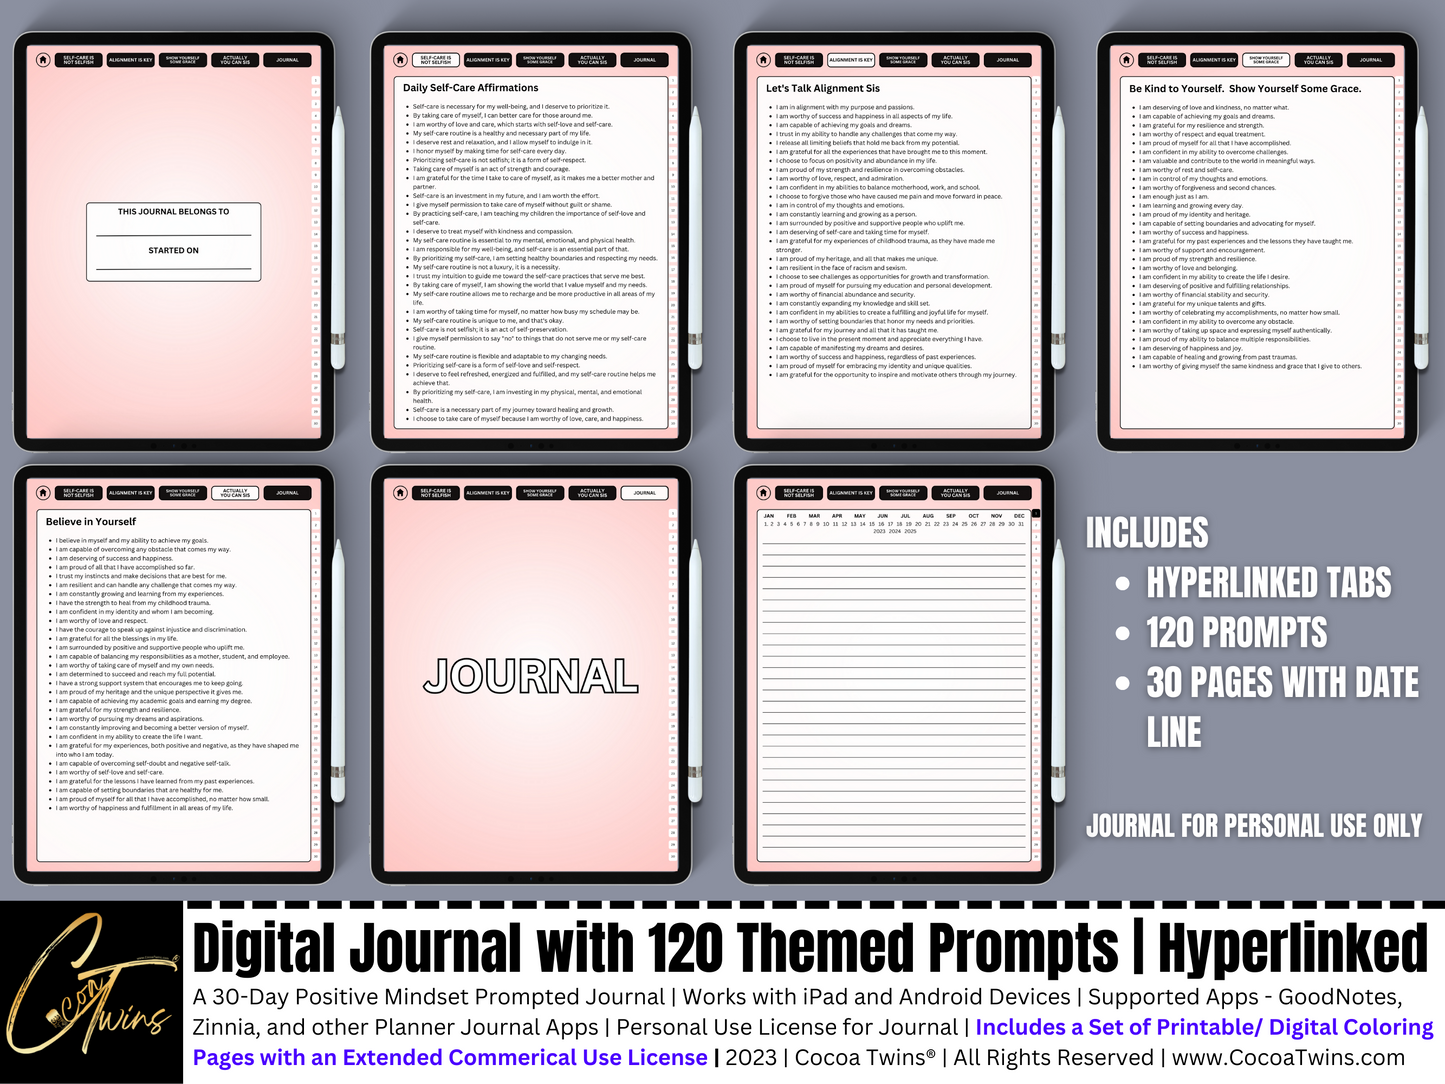 Mindset Matters - Grace | A Hyperlinked Digital Journal with 120 Themed Prompts